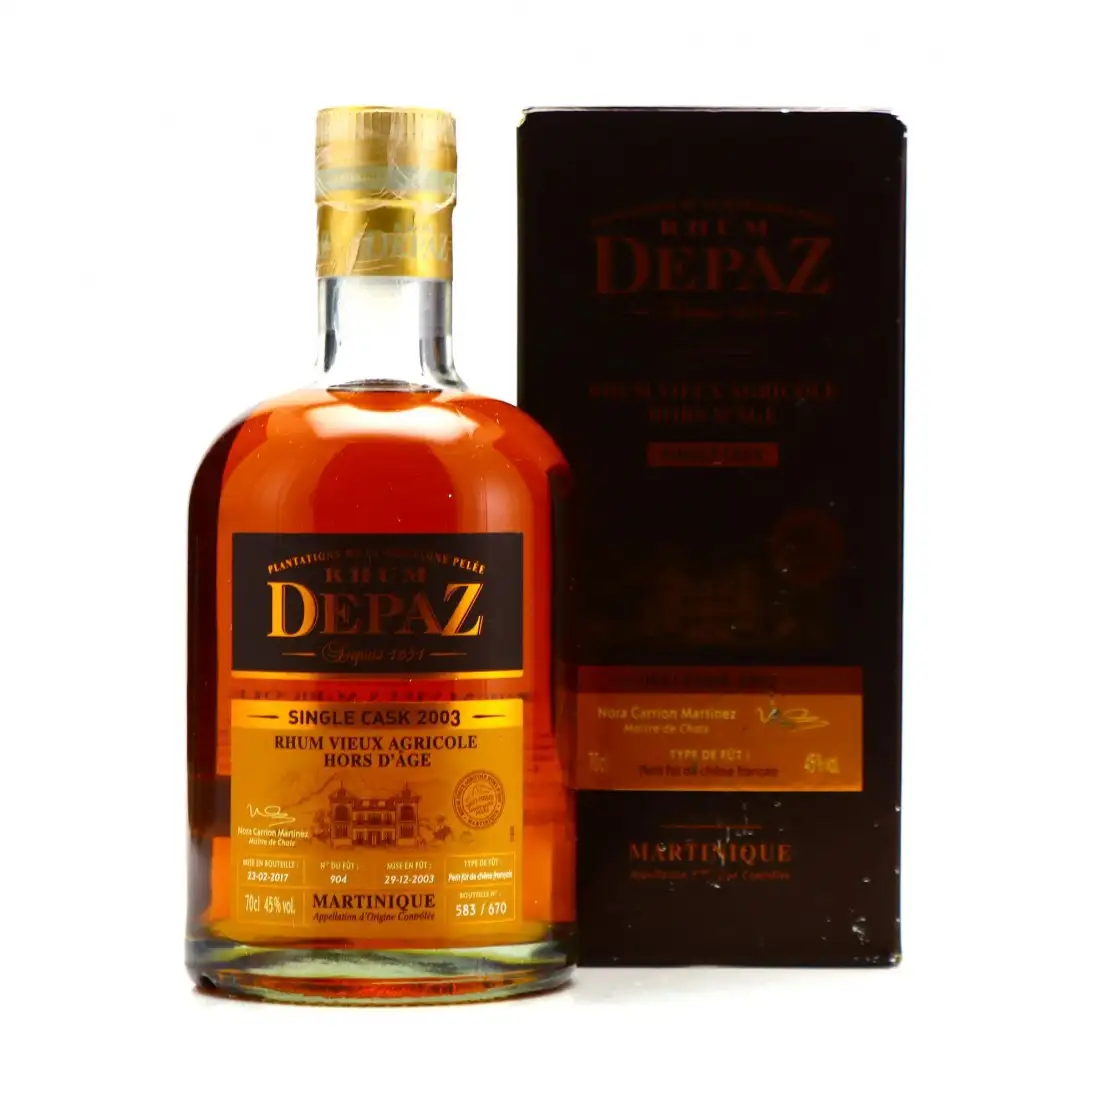 Image of the front of the bottle of the rum Single Cask